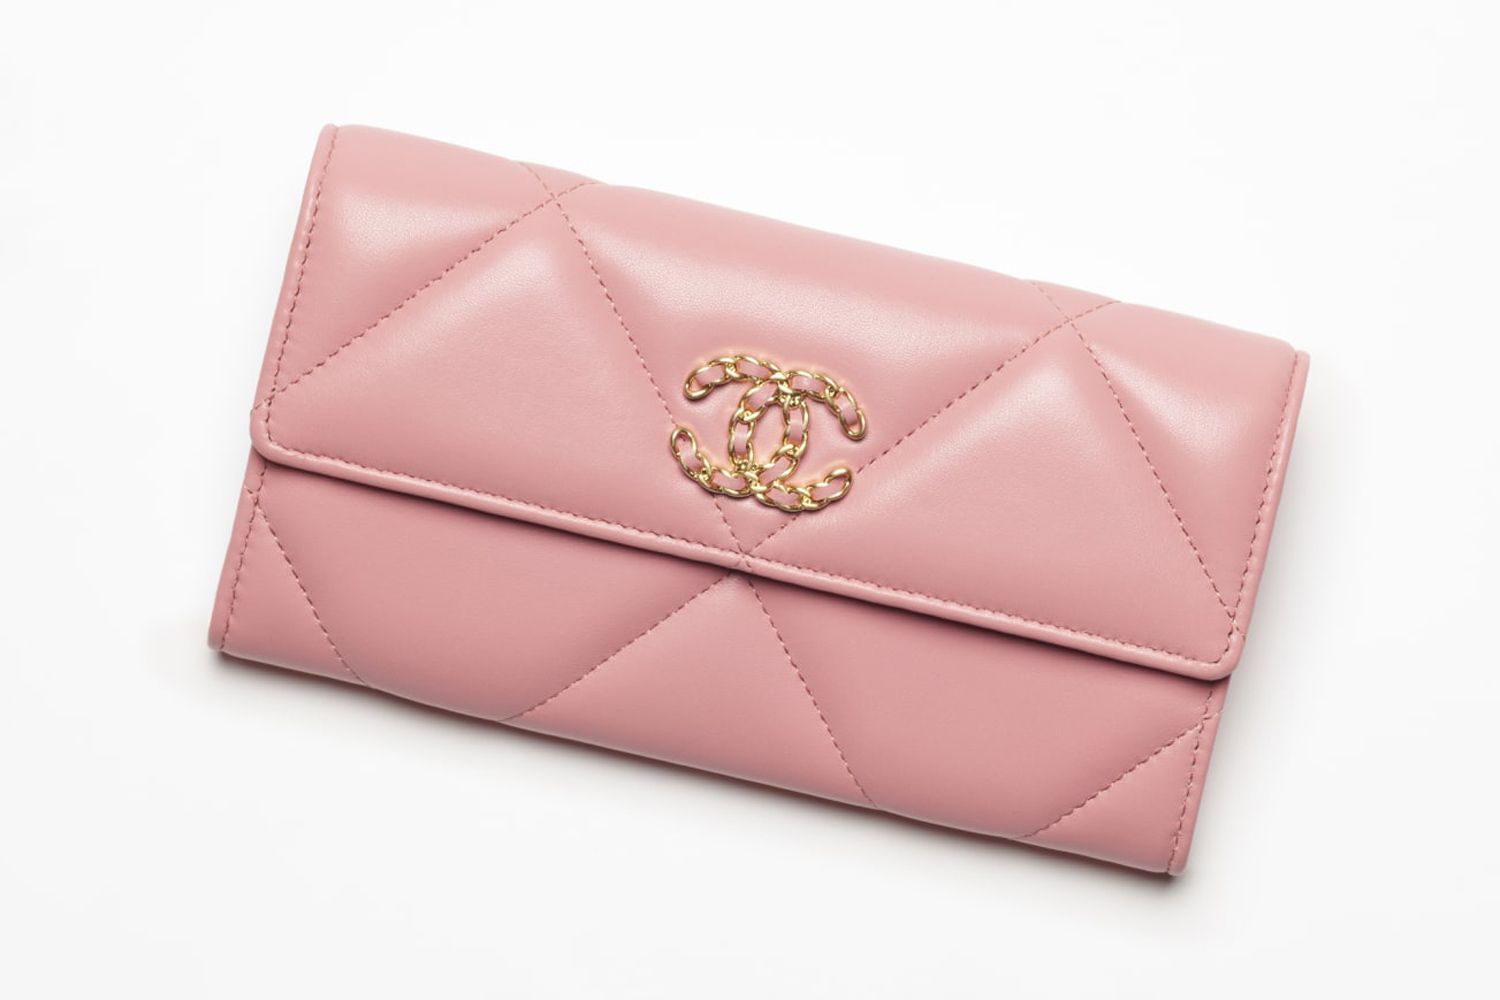 Coin Purses: An Ultimate Style Guide | LoveToKnow